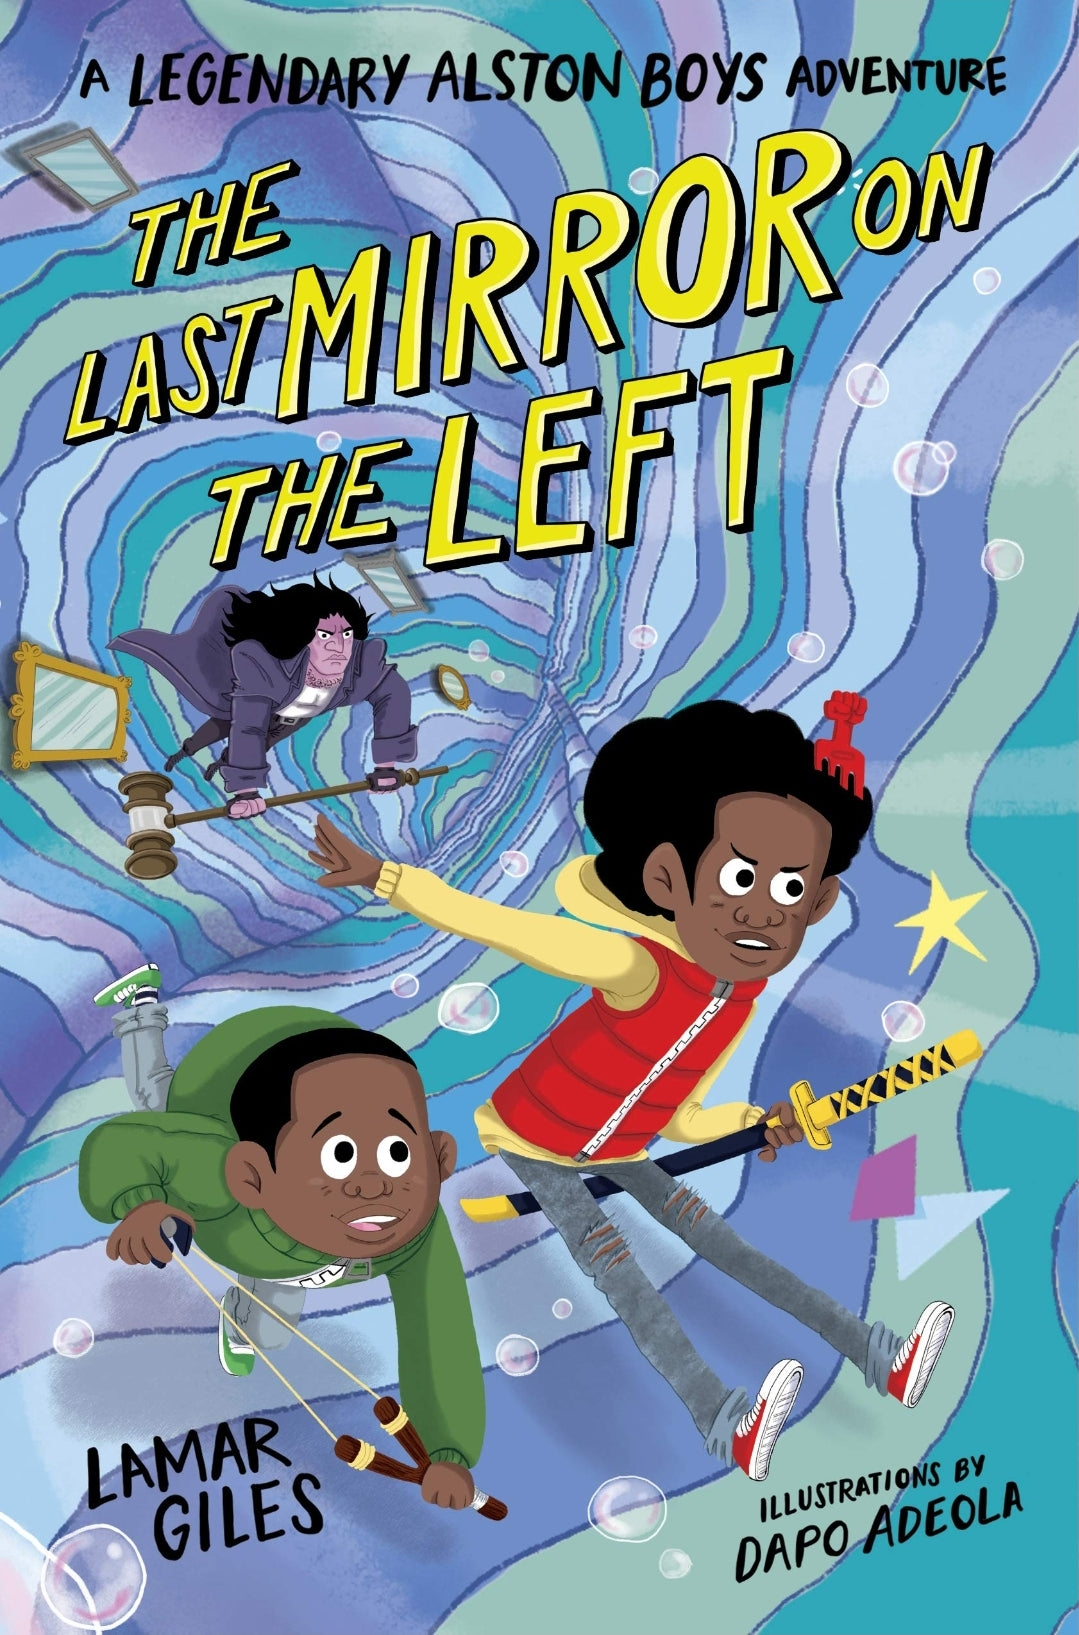 The Last Mirror On The Left by Lamar Giles